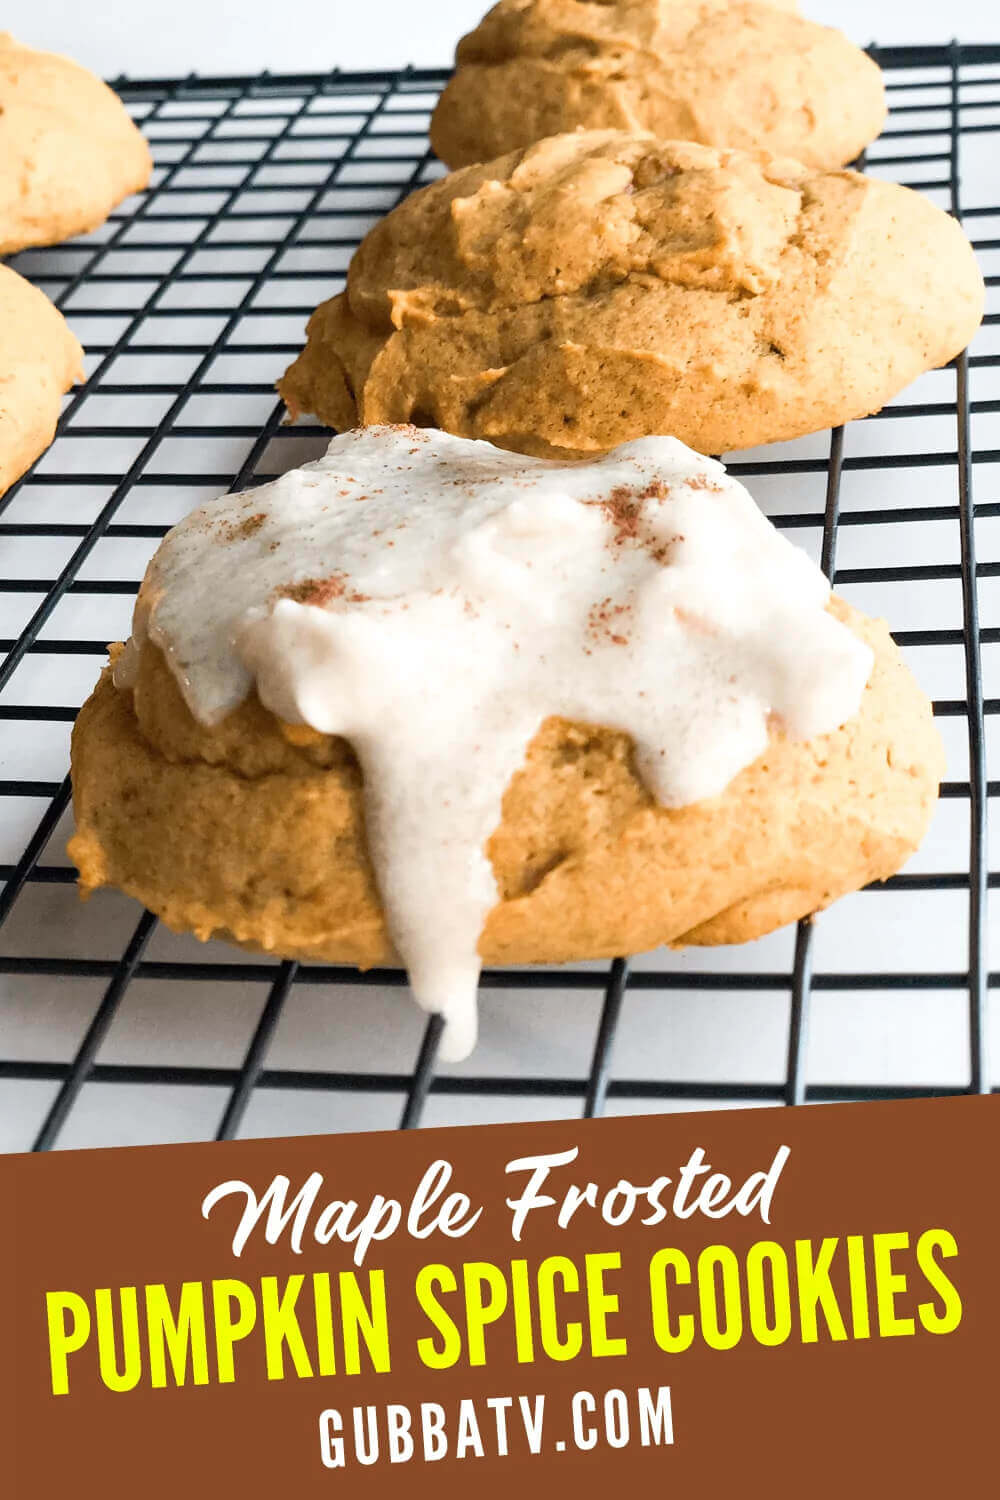 Maple Frosted Pumpkin Spice Cookies